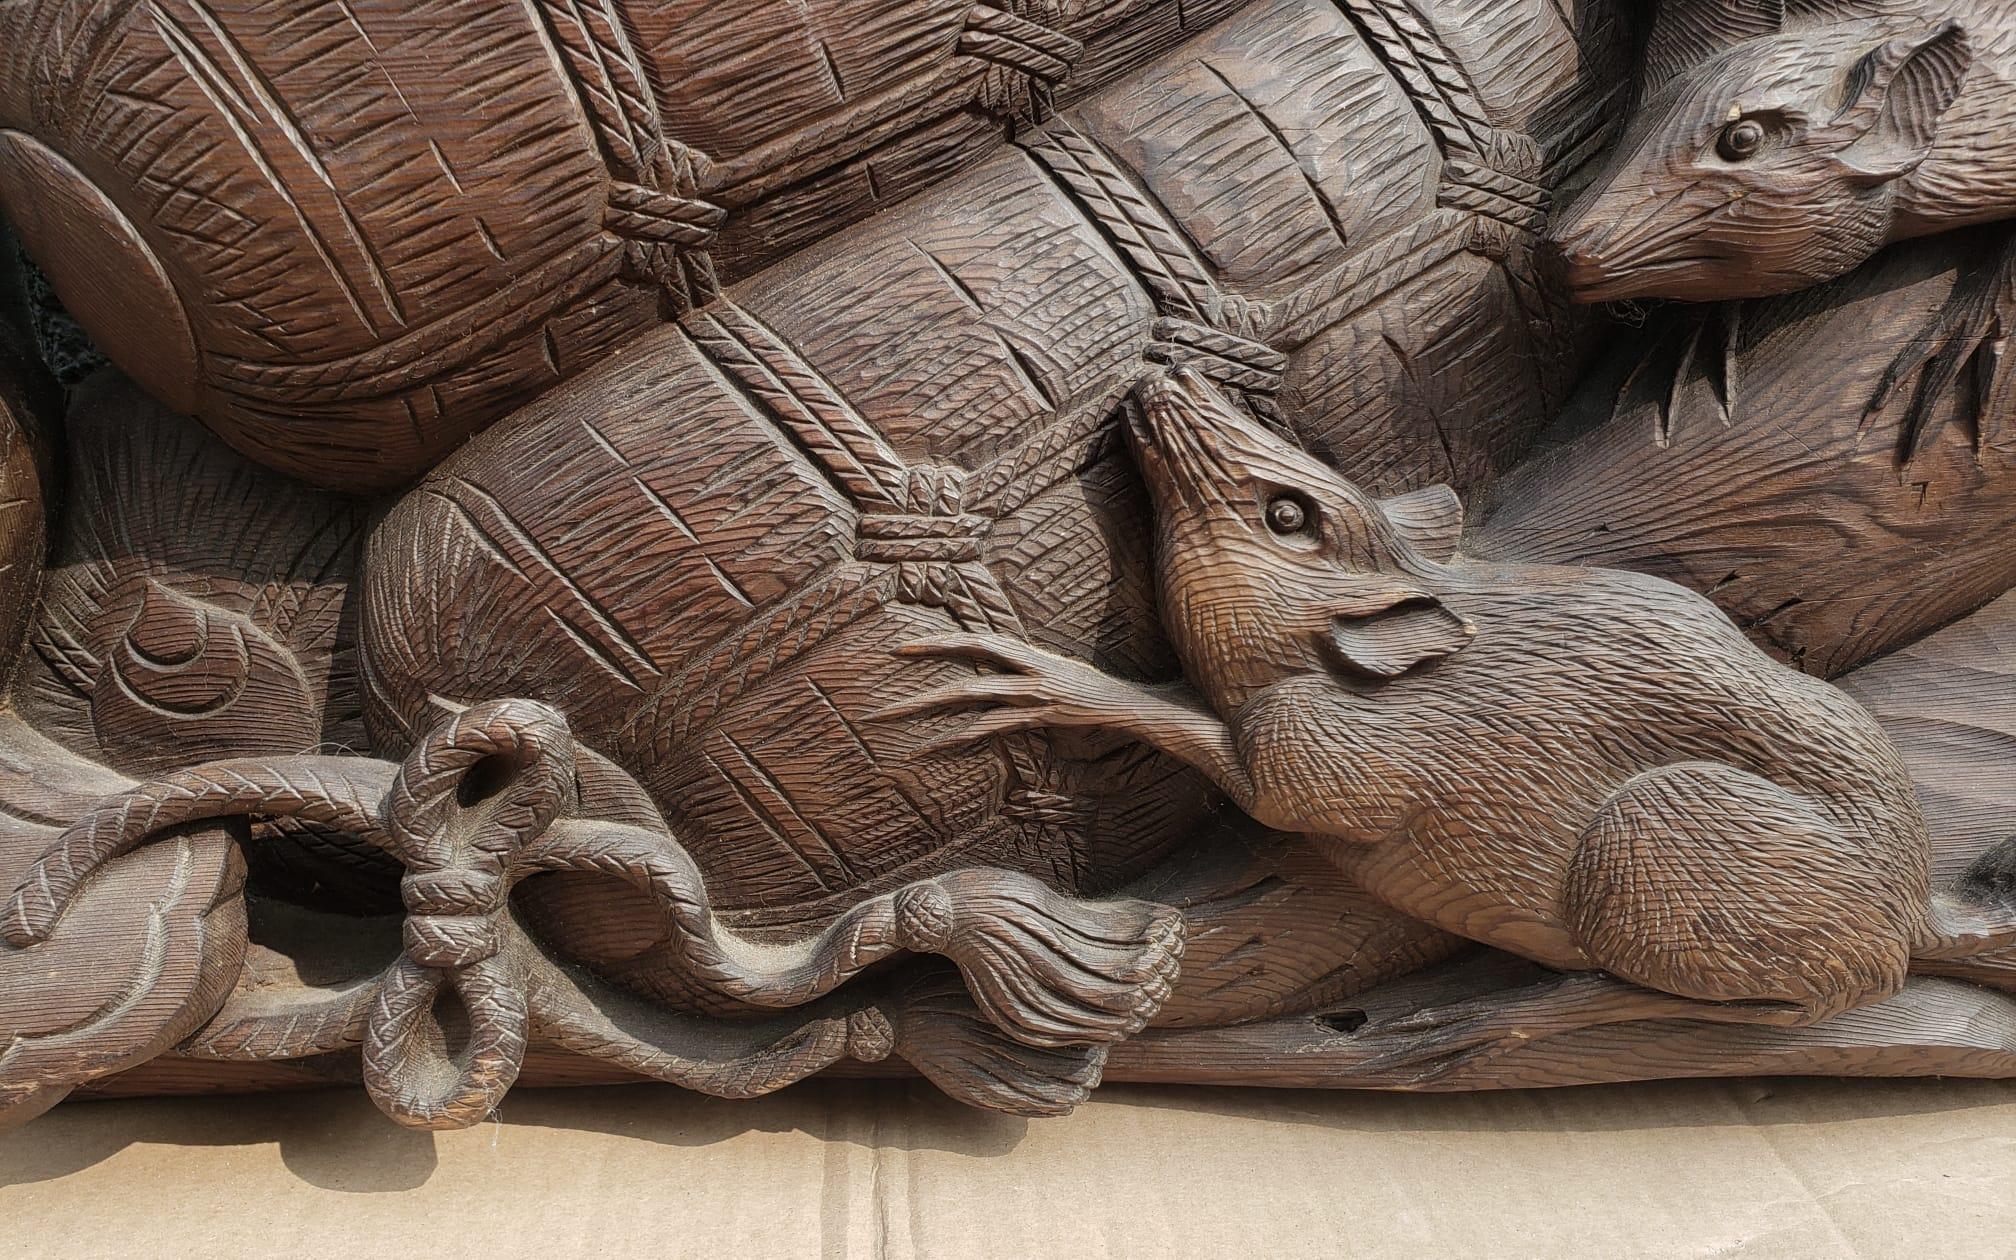 Anglo-Japanese Large Japanese Stained Pine Rodents And Baskets Carving Scupture 